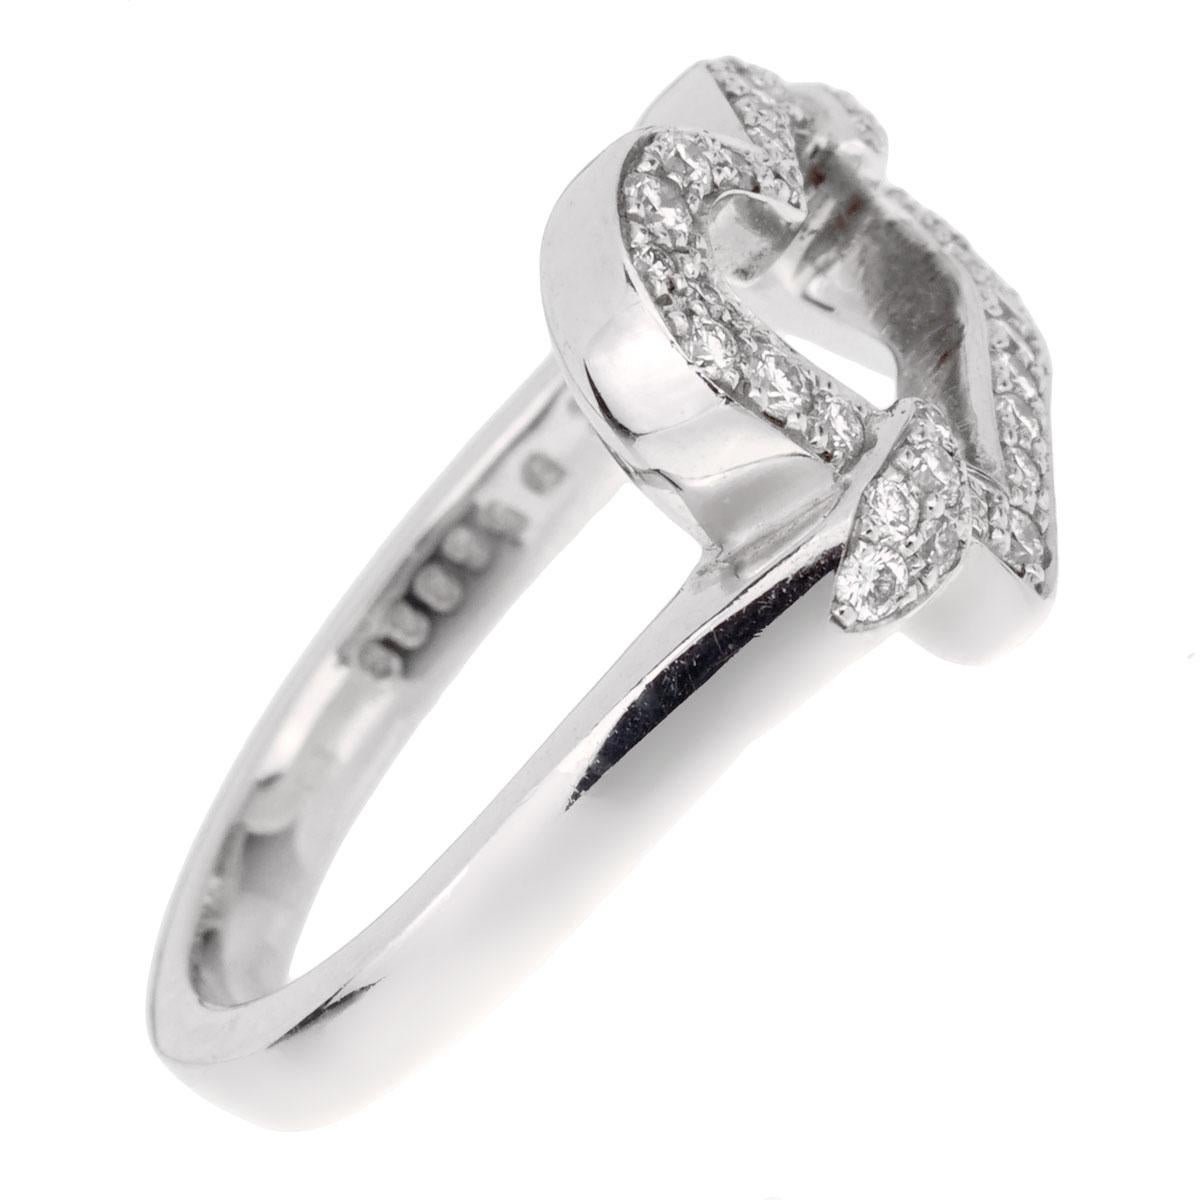 A stunning Piaget diamond ring showcasing a heart shaped motif adorned with round brilliant cut diamonds in 18k white gold. The ring measures a size 6 1/2 and is resizeable.

Sku: 1914